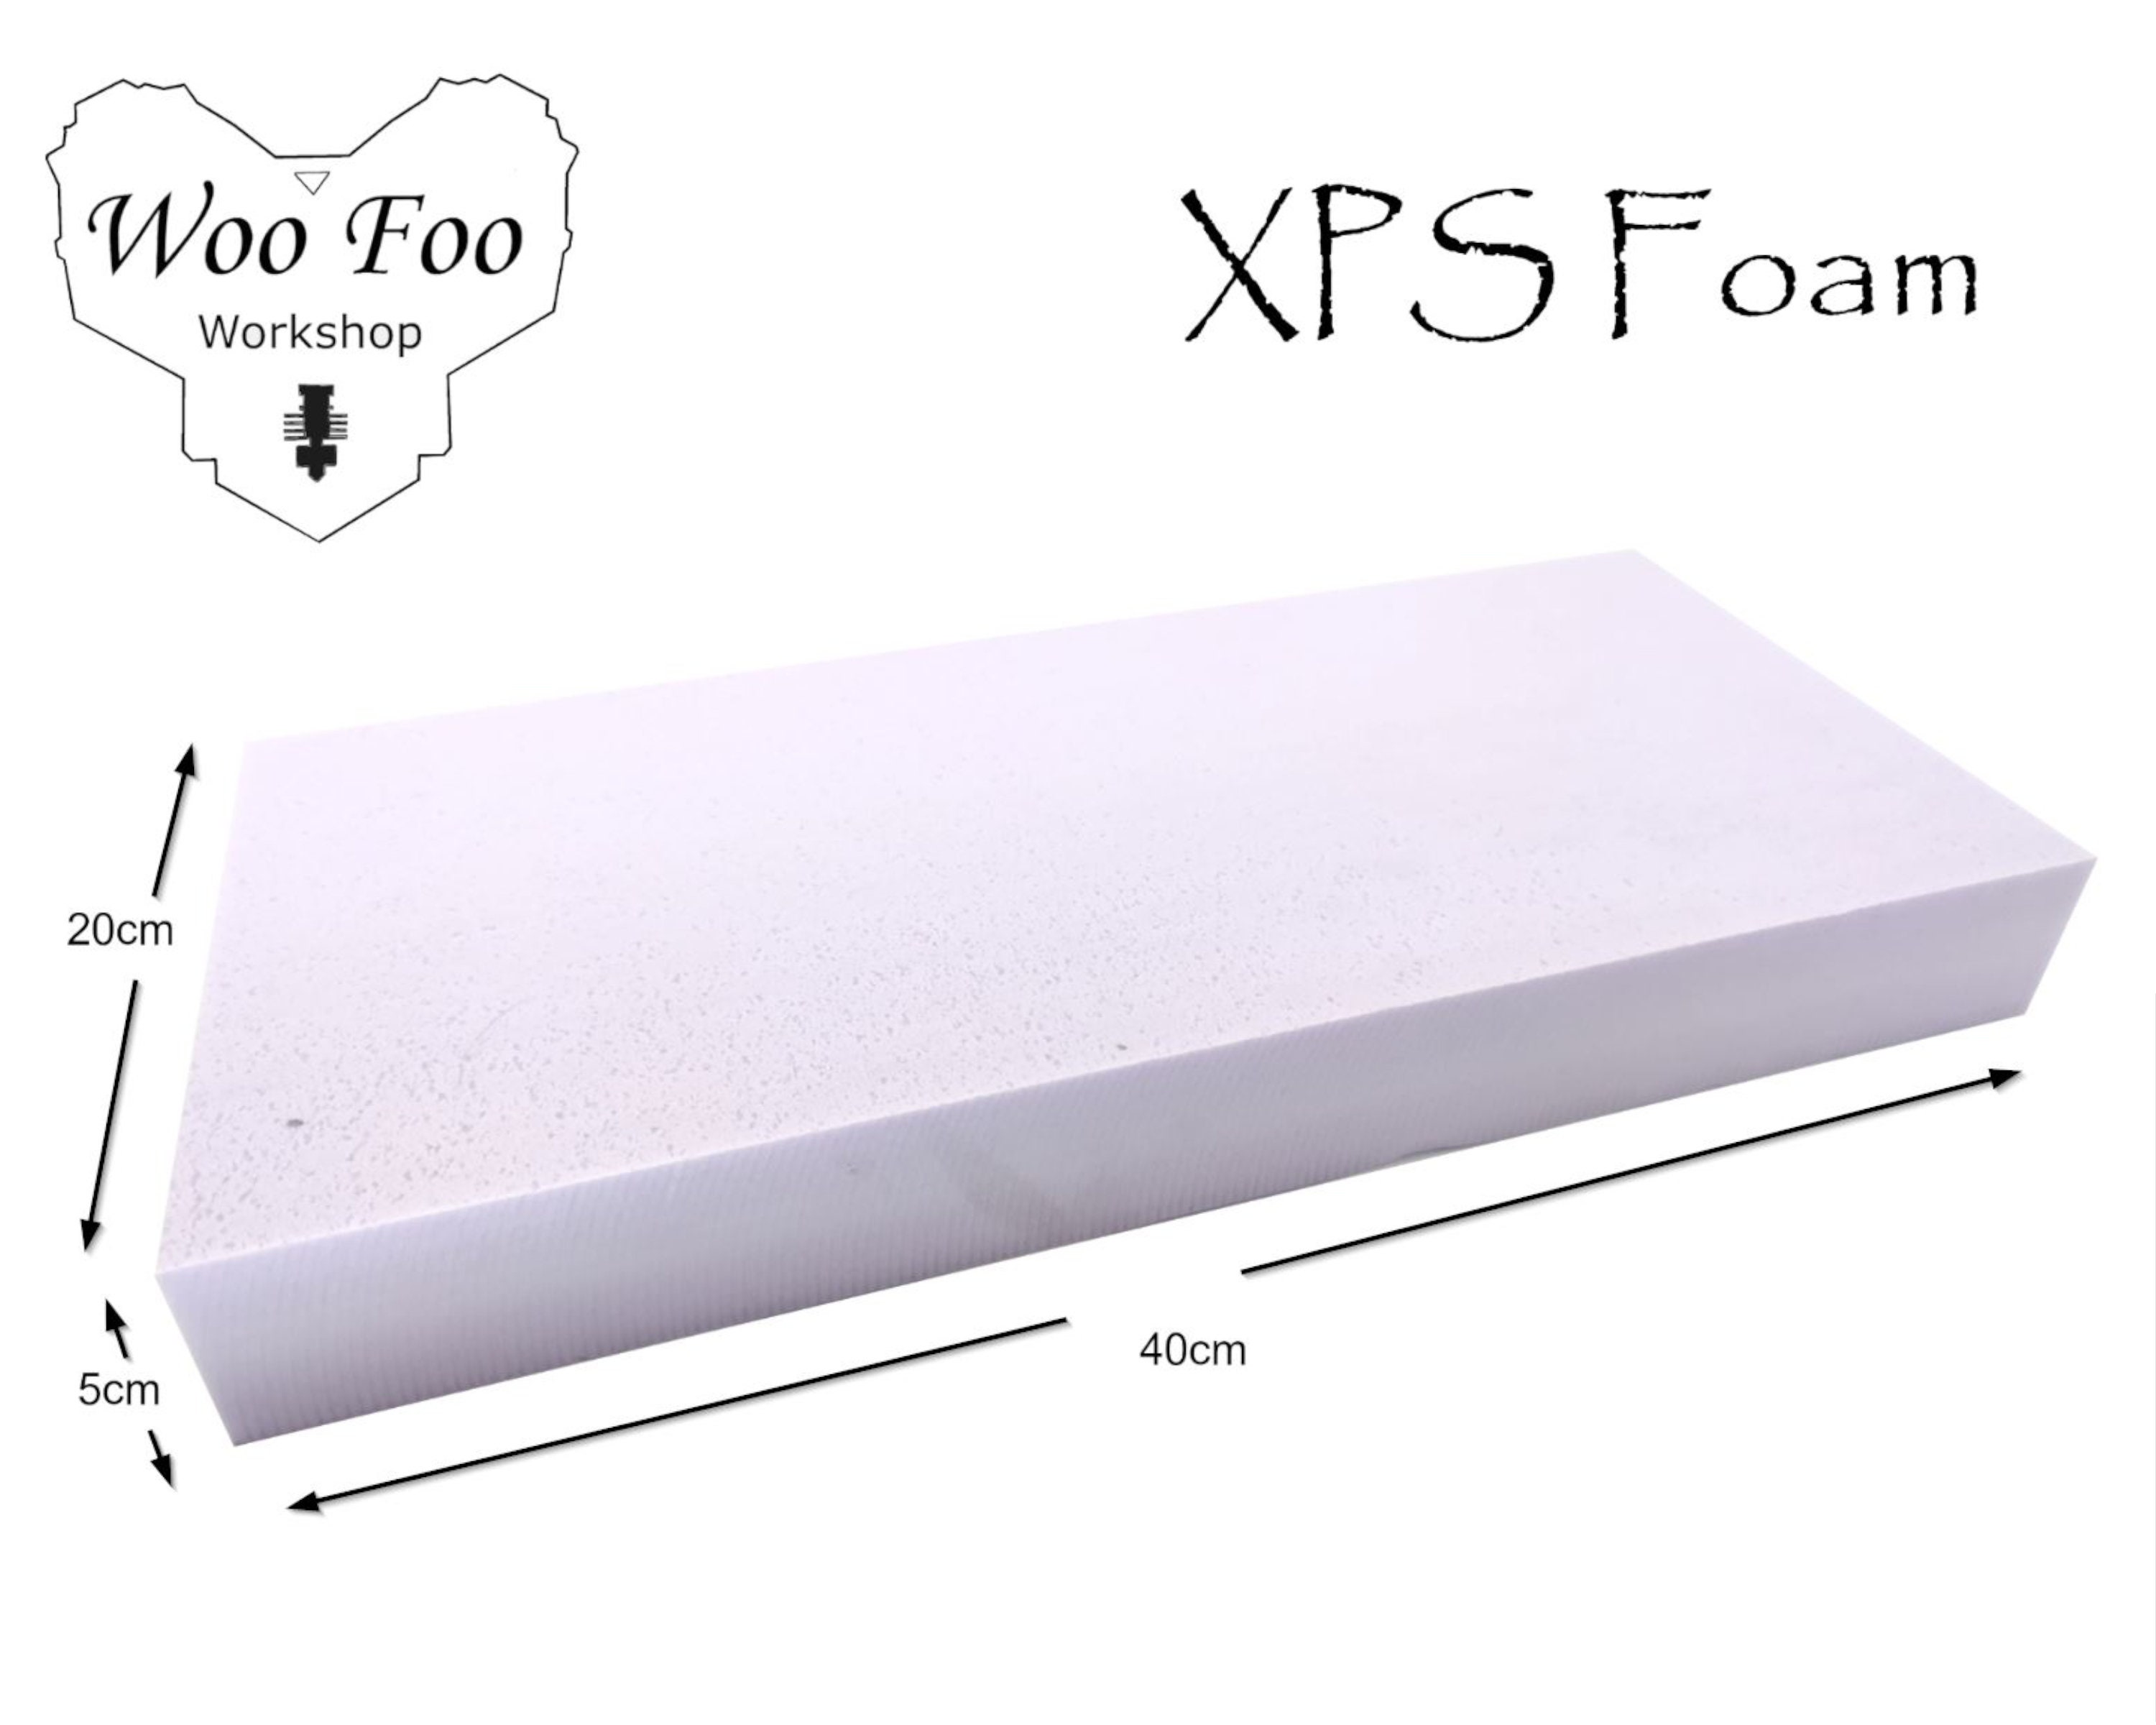 Extruded FOAM XPS 30mm - A4 size - scrapbooking poliestyrene model hobby  craft mountains